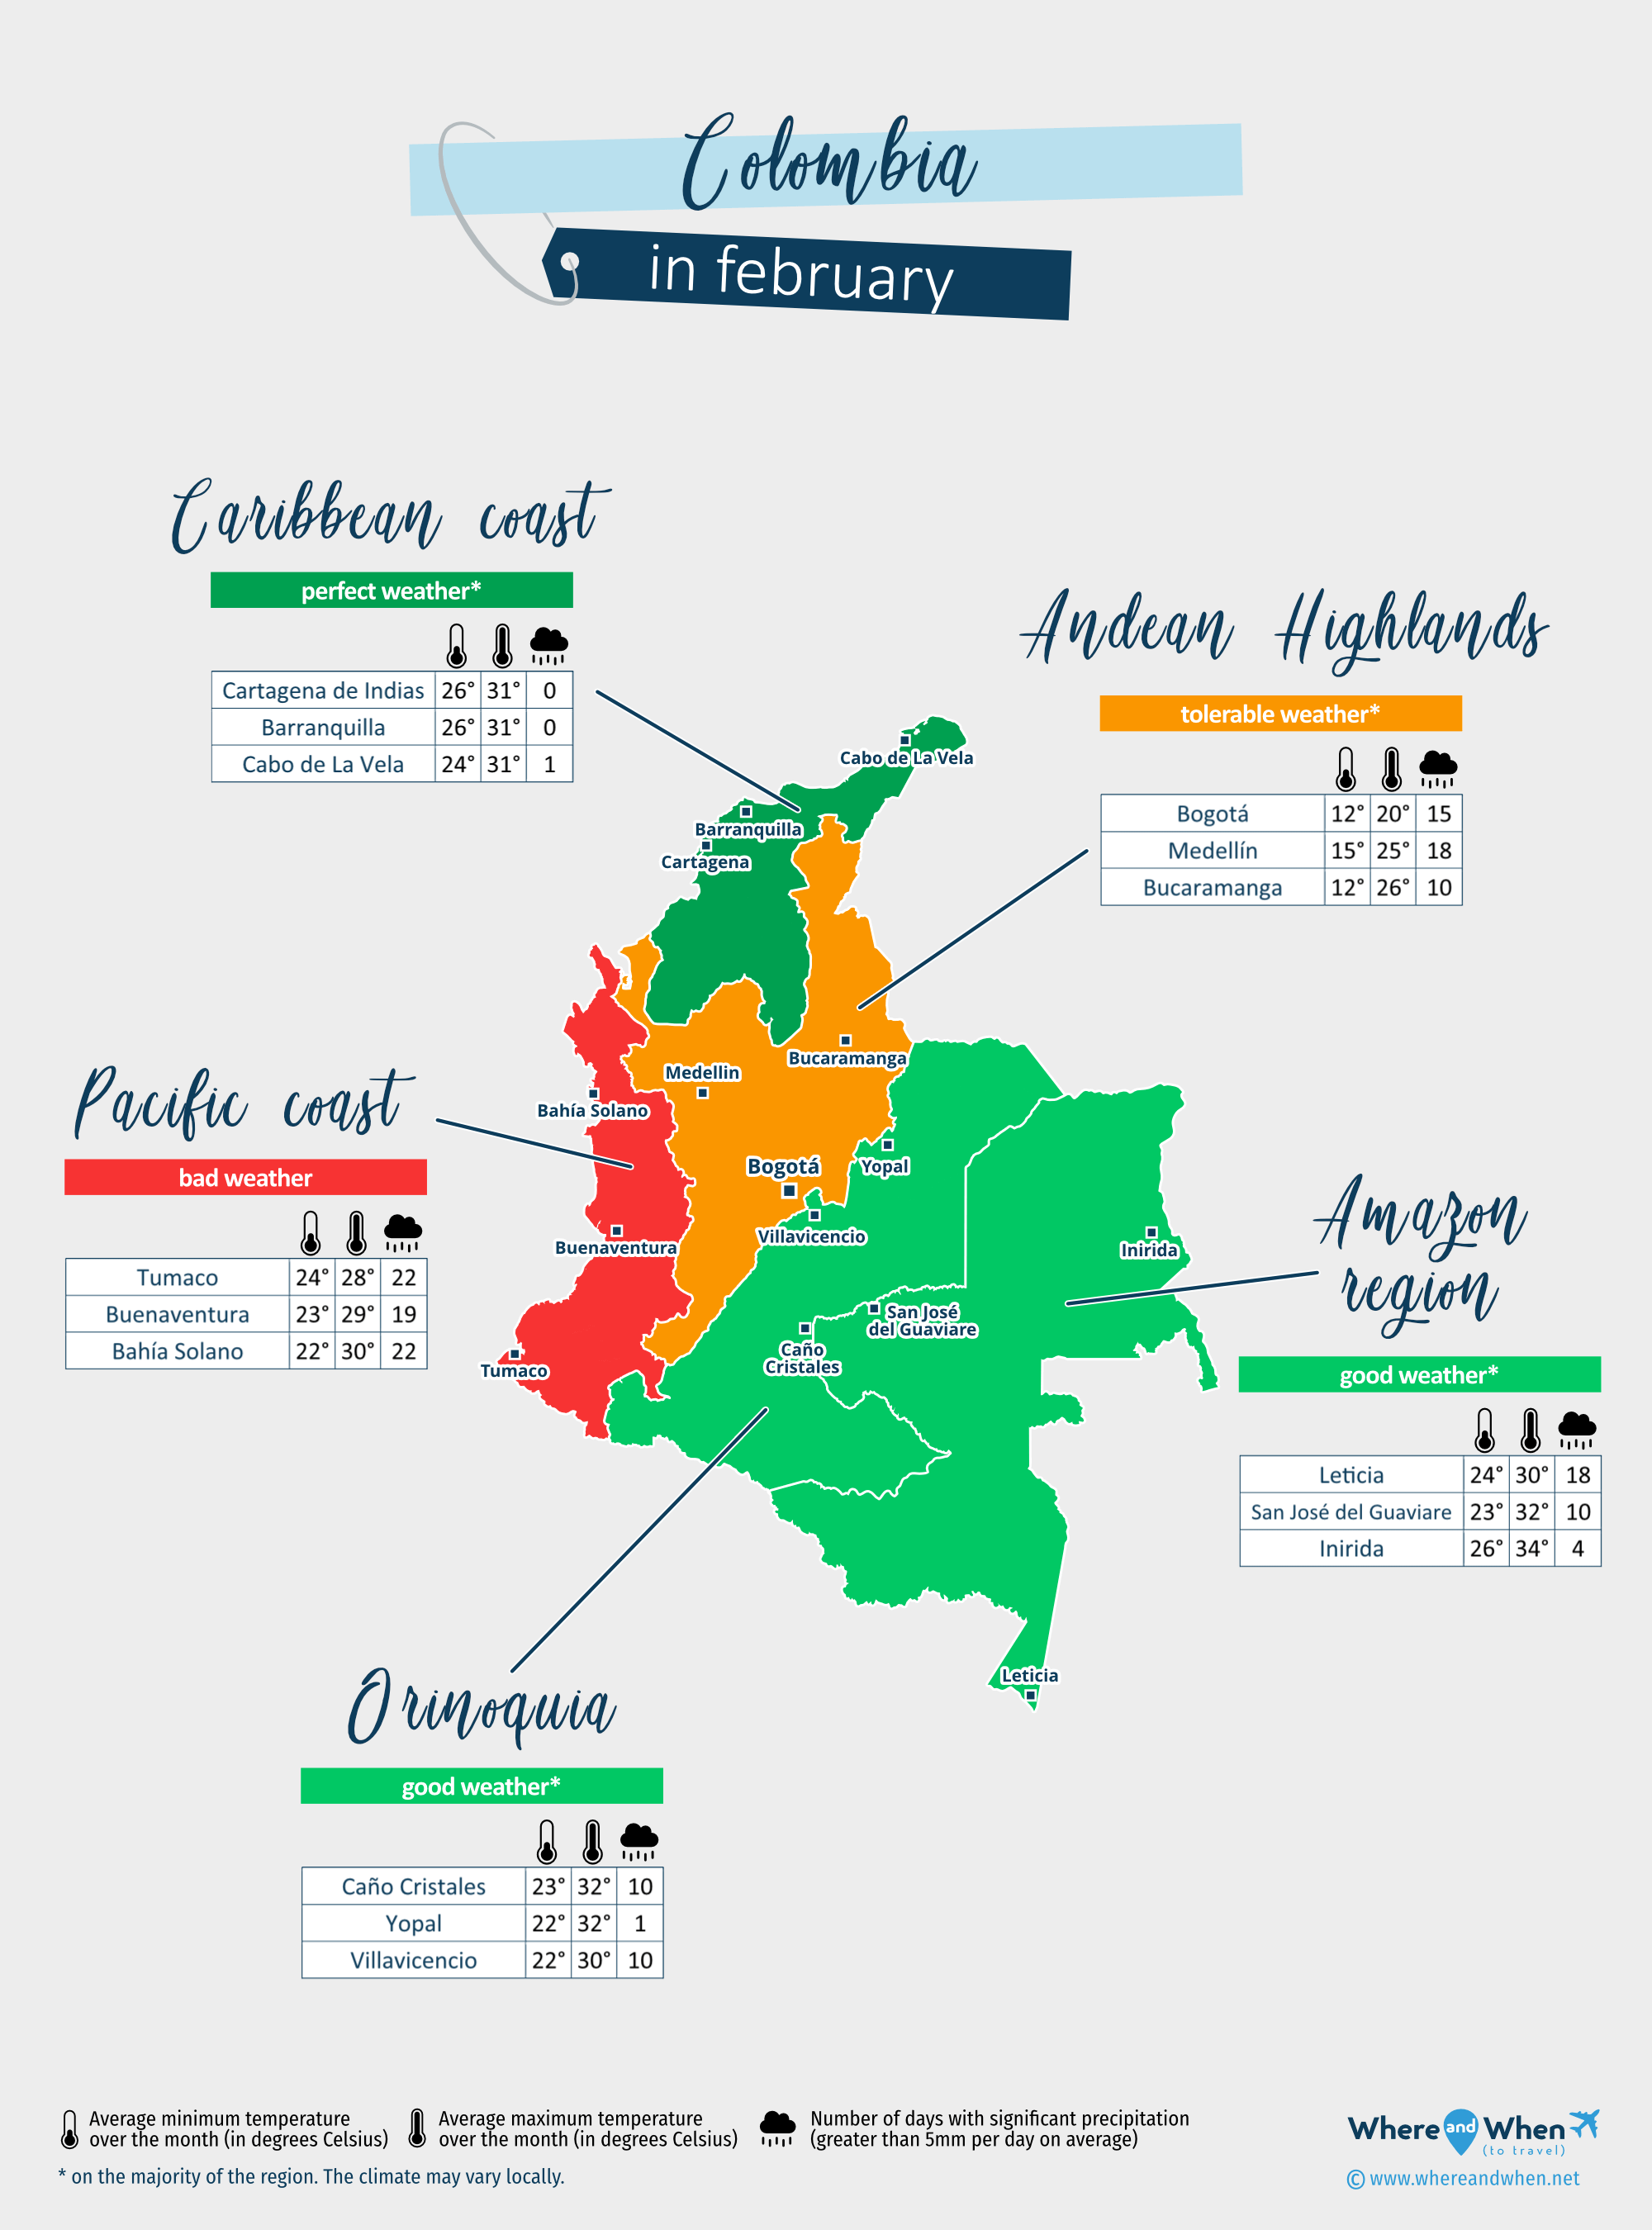 Colombia: weather map in february in different regions